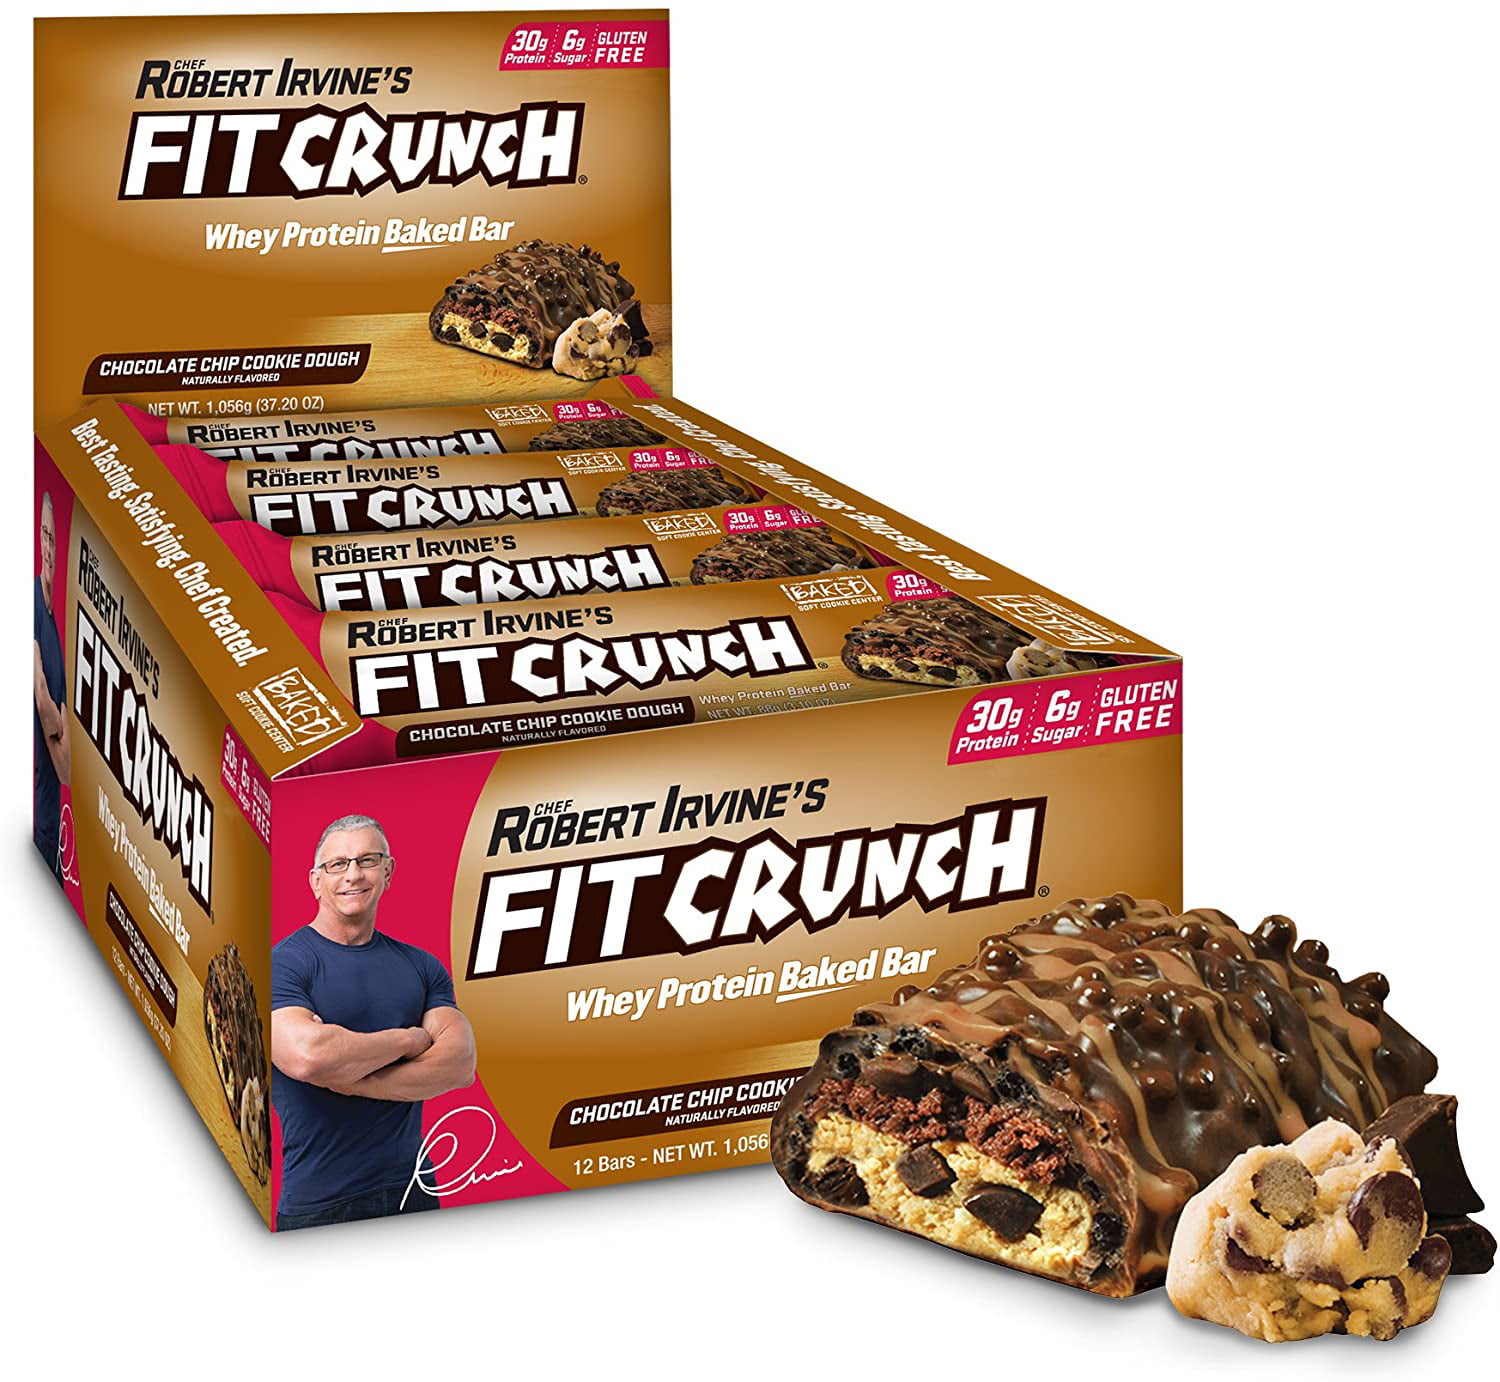 Fit Crunch Protein Bar Chocolate Chip Cookie Dough 30g Protein 12 Ct